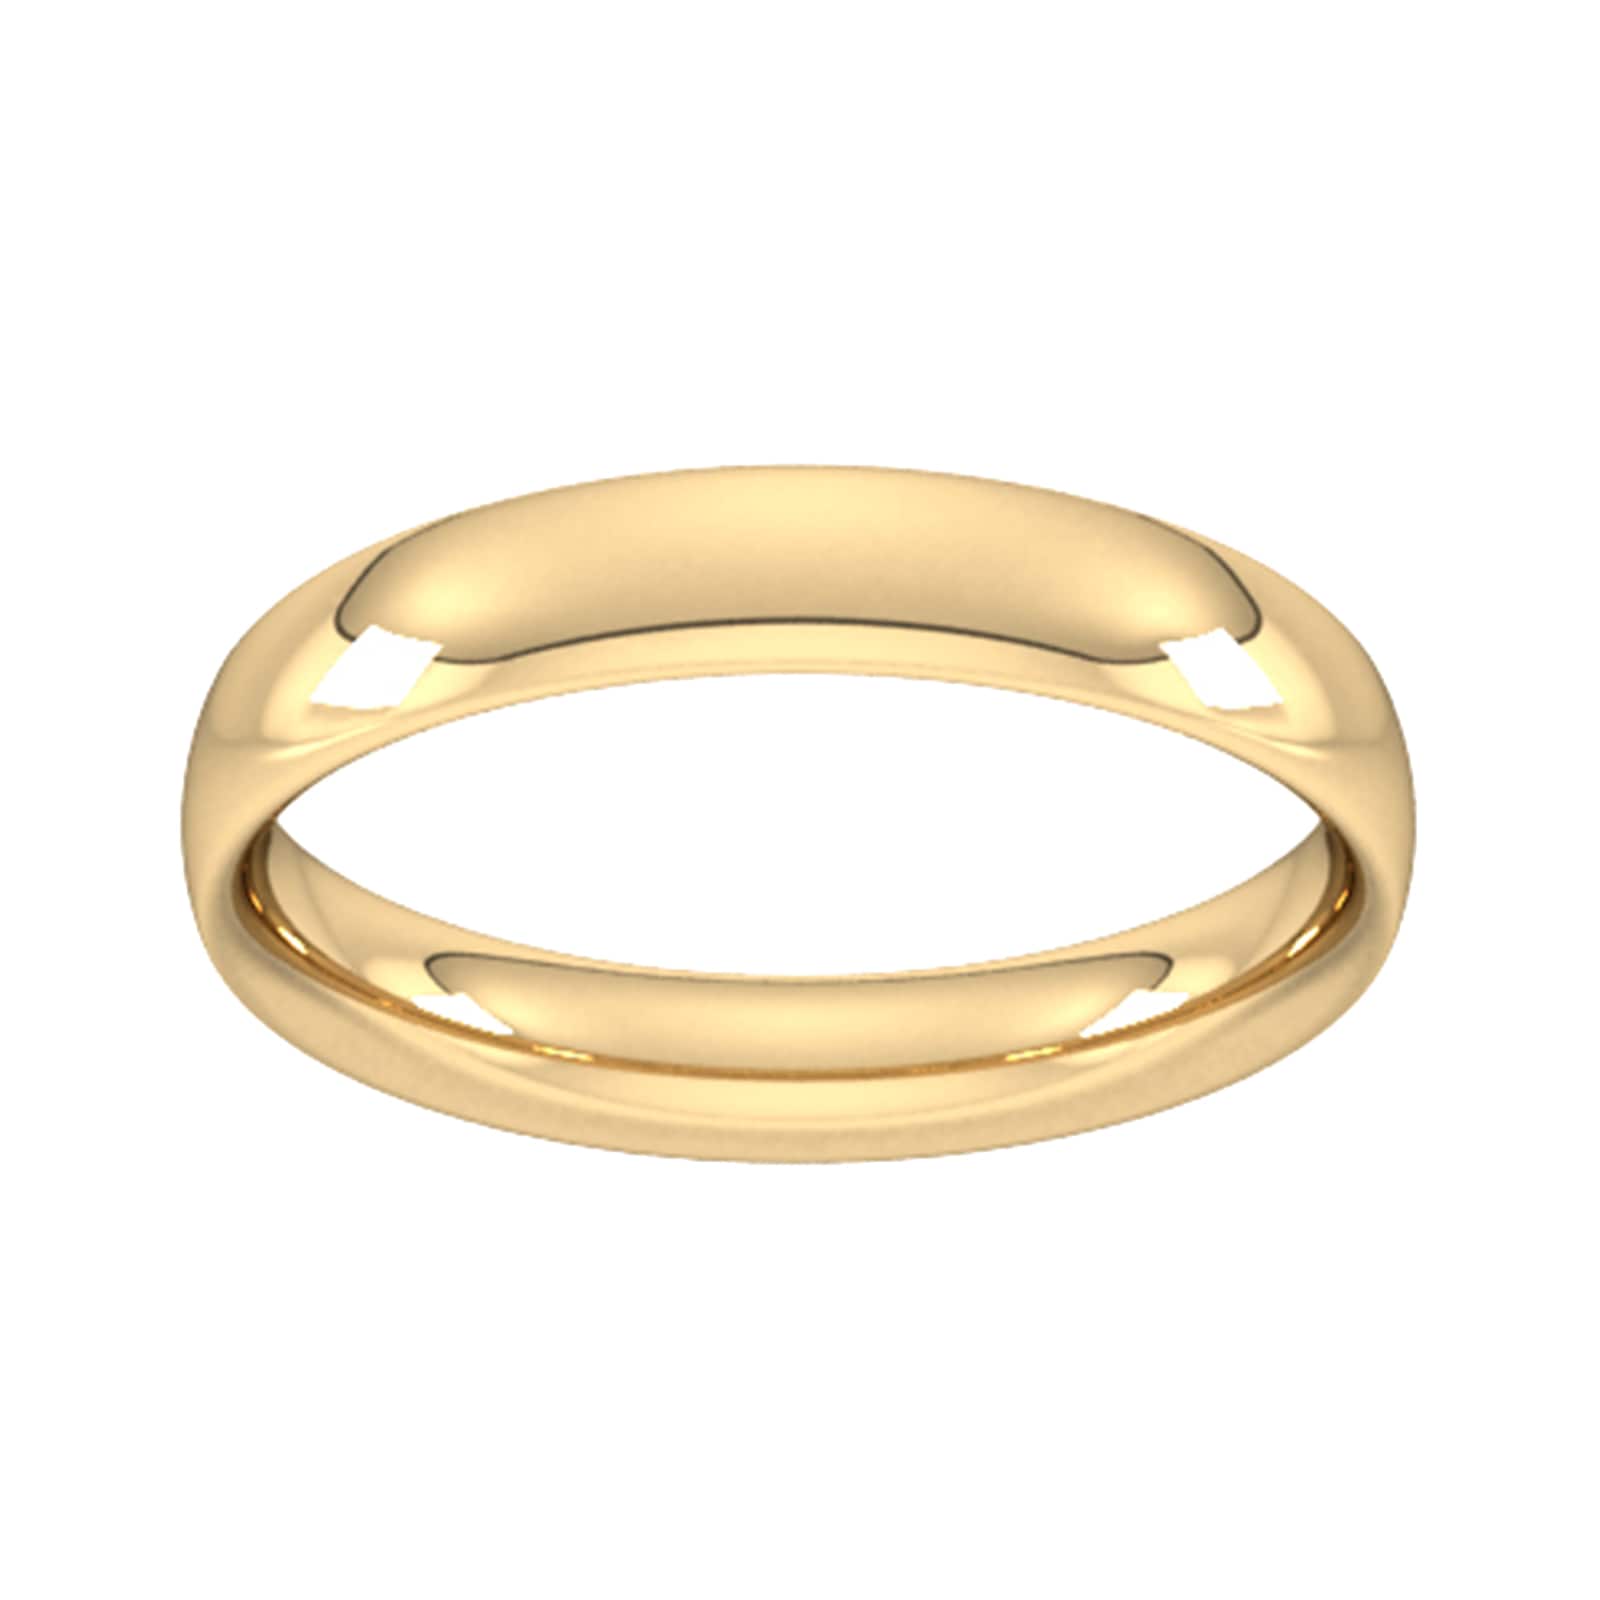 4mm Traditional Court Heavy Wedding Ring In 9 Carat Yellow Gold - Ring Size R